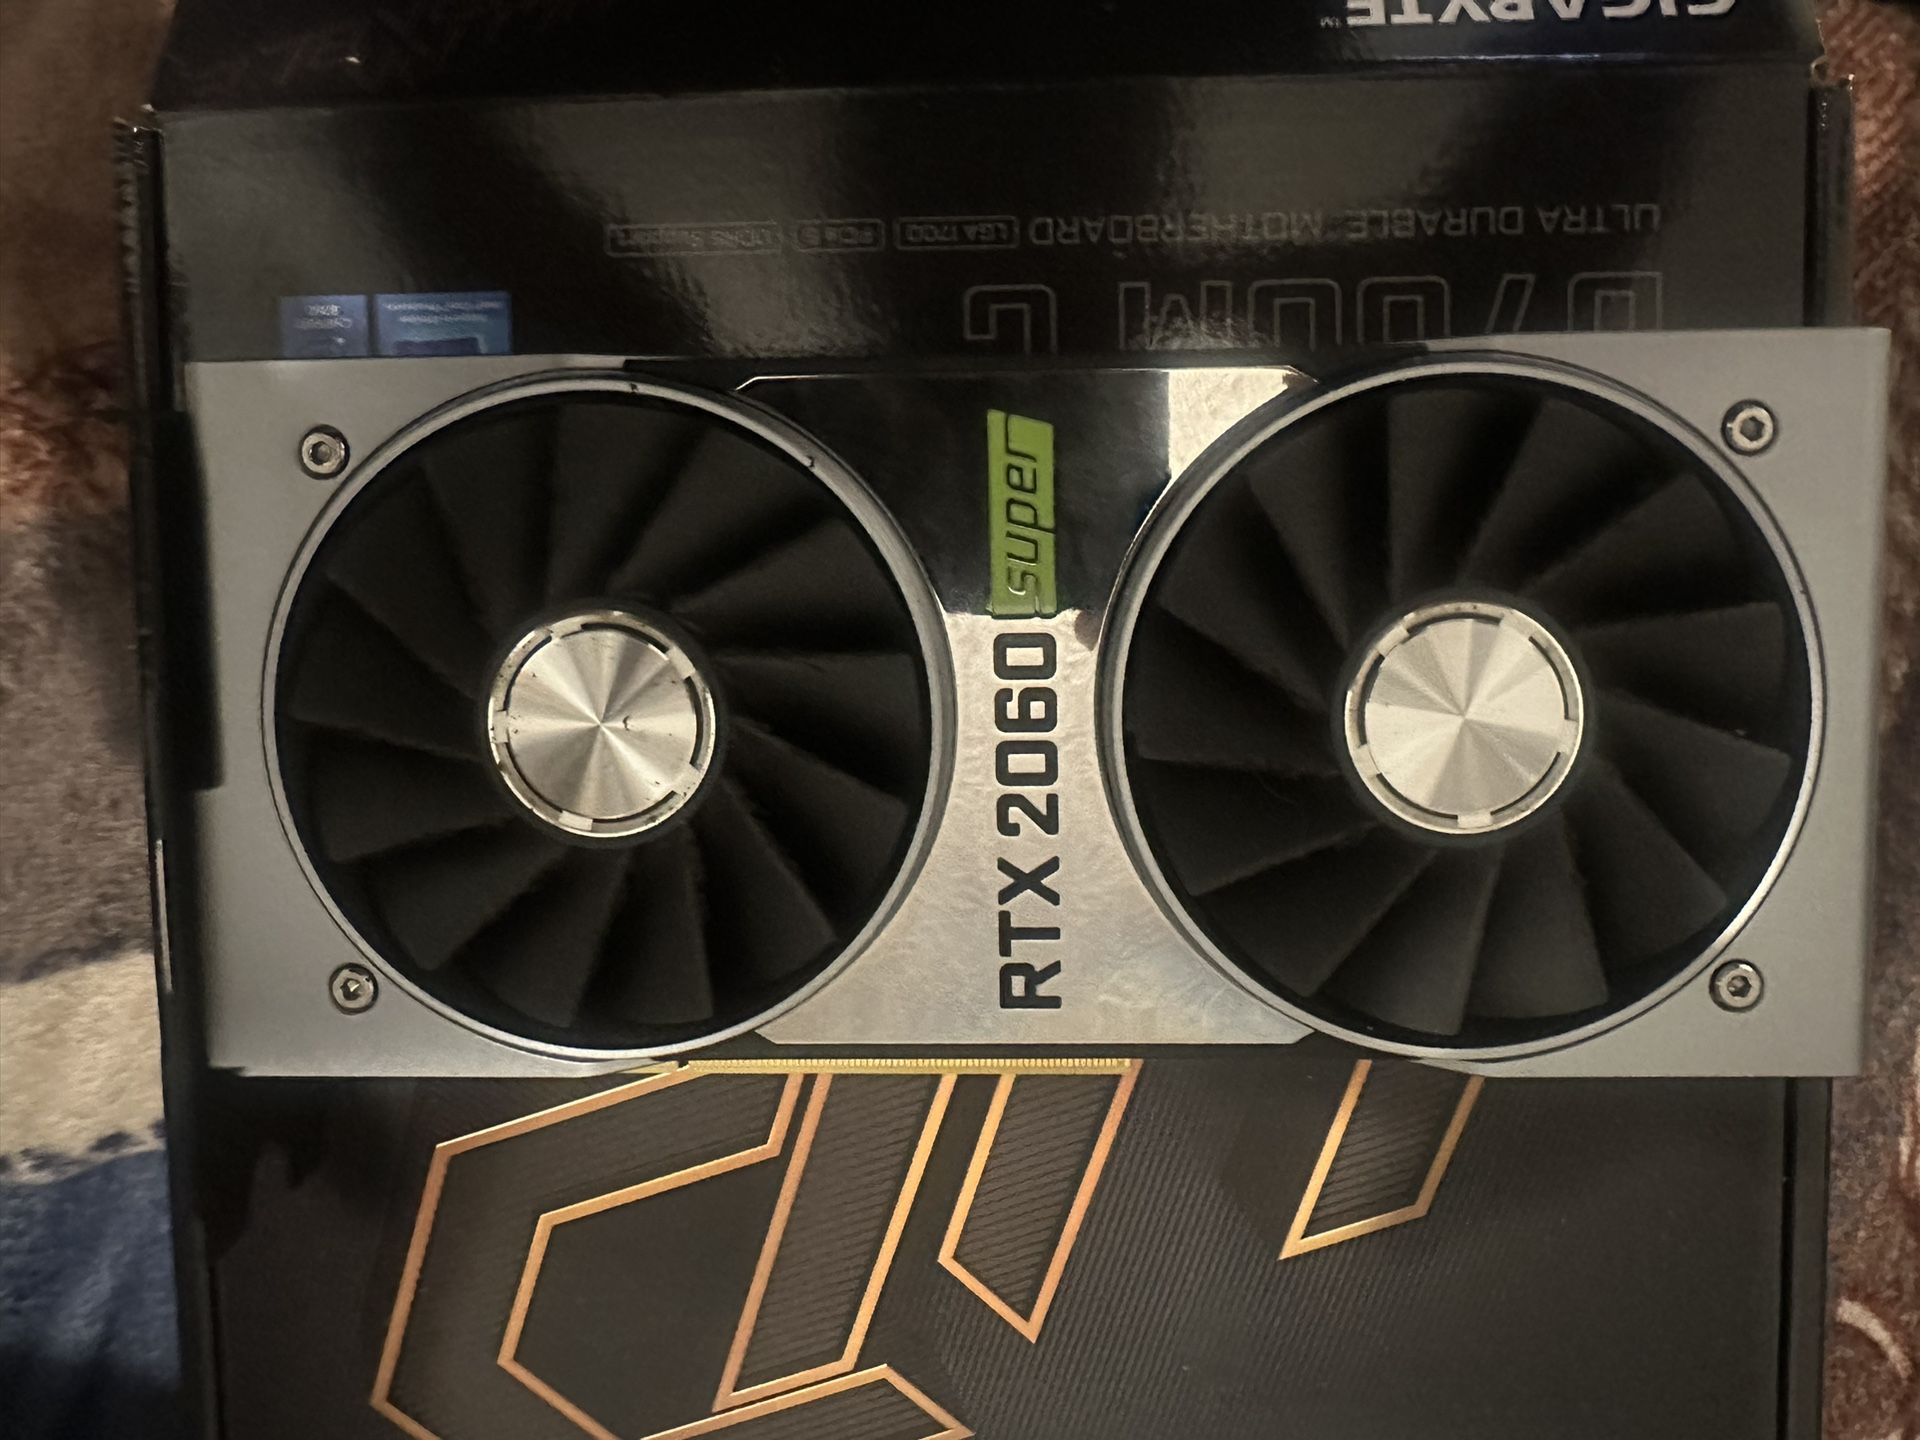 RTX 2060 Super (Founders Edition) 